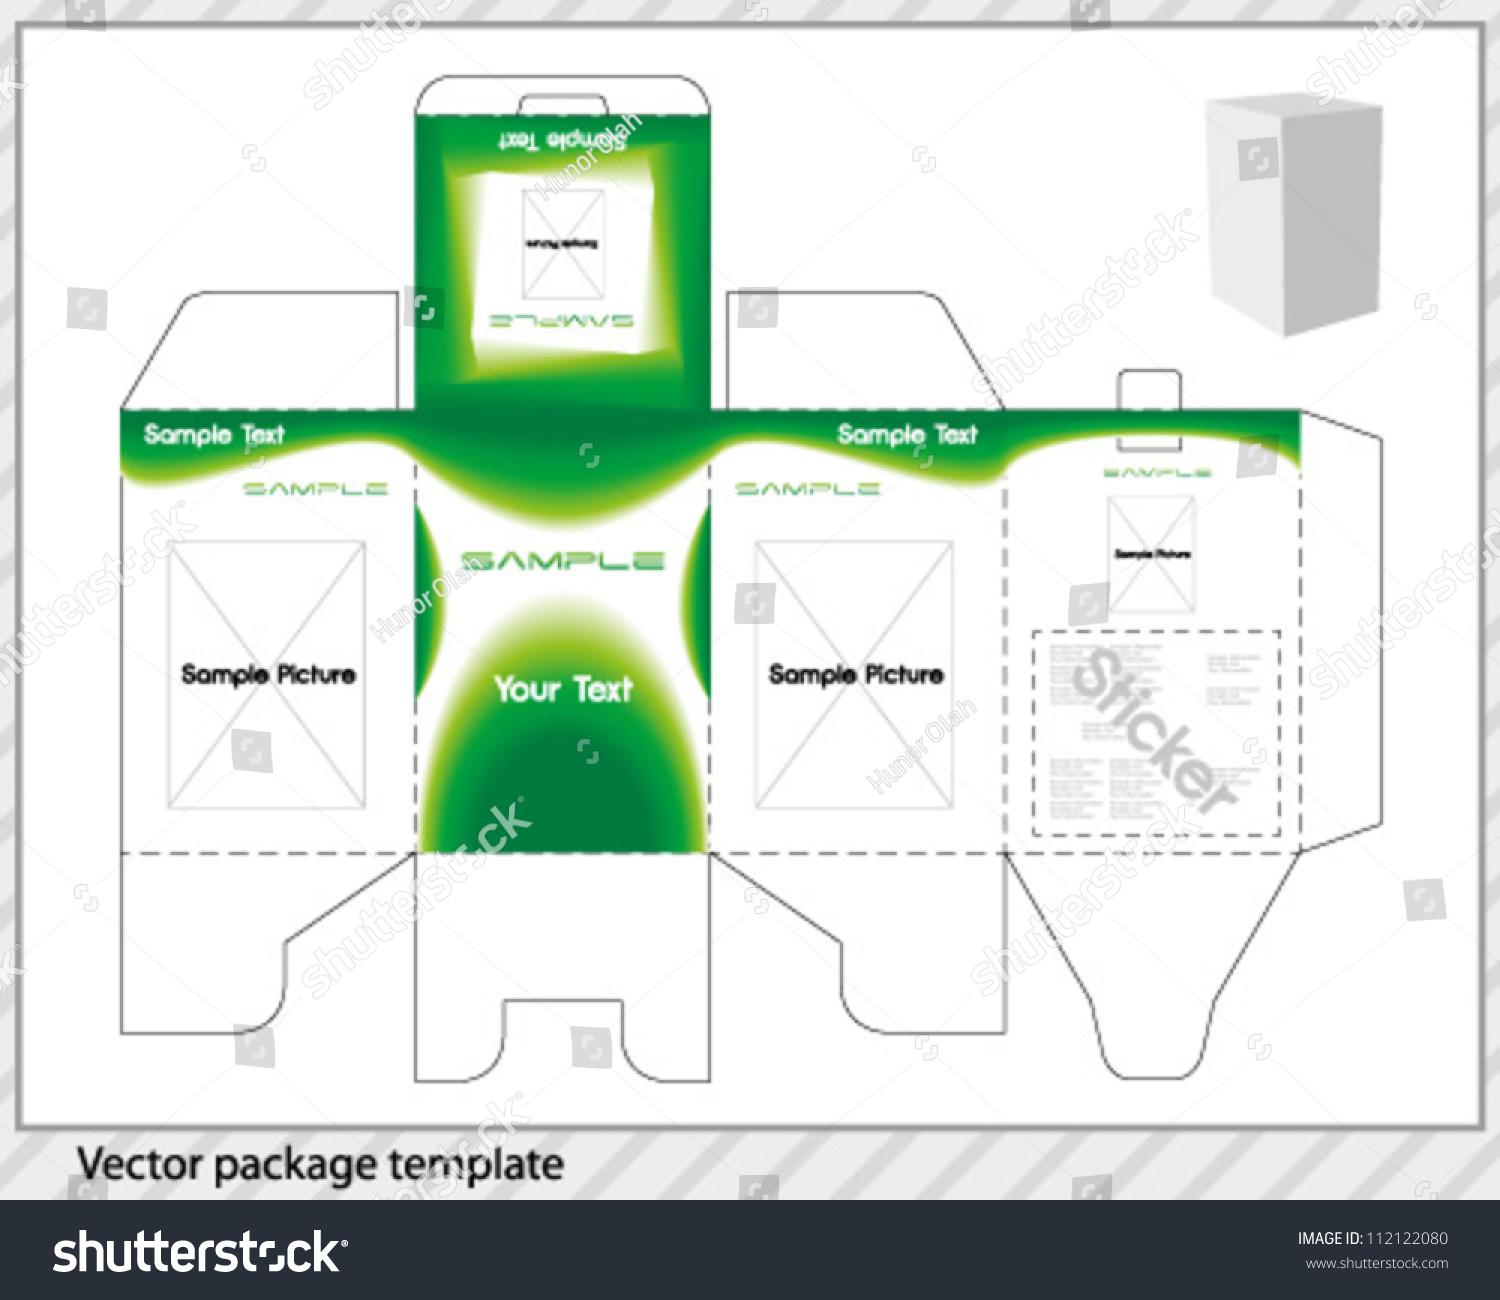 Vector Package Template Applied Design Stock Vector 112122080 ...